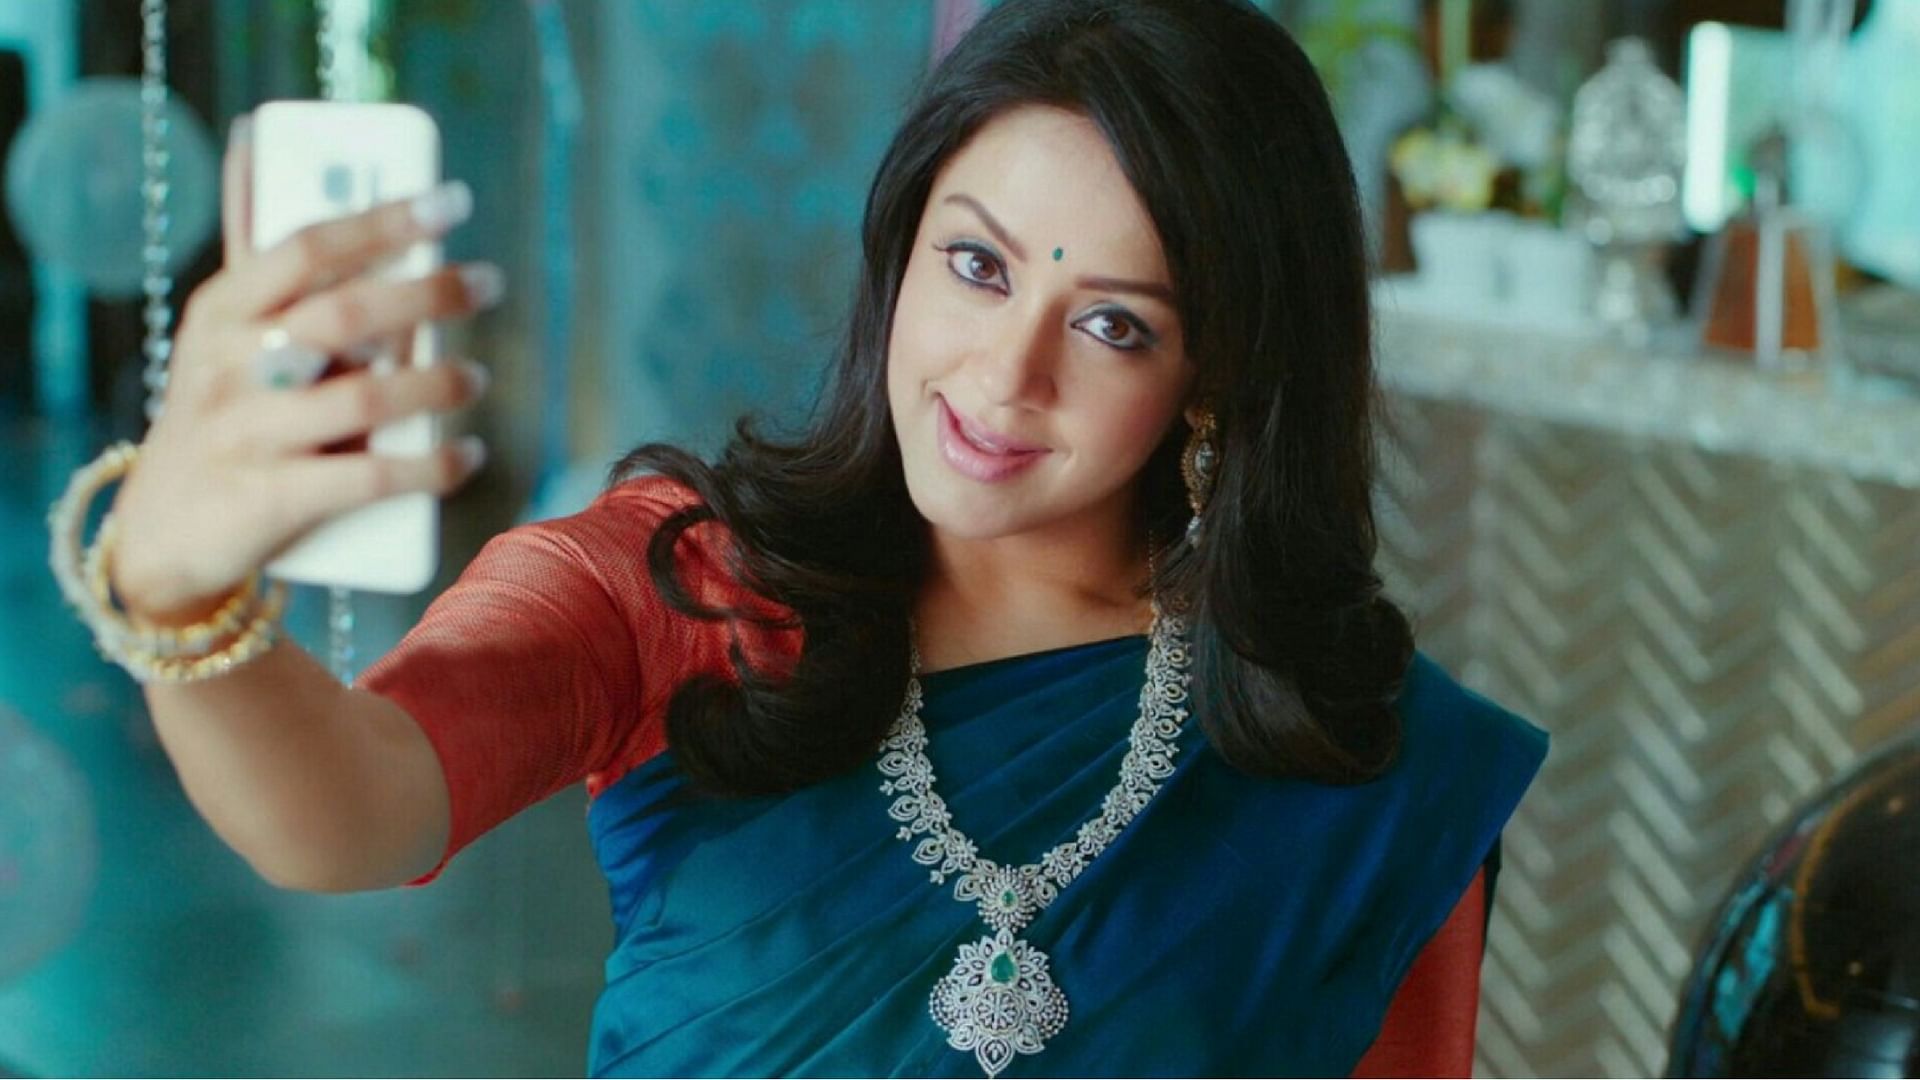 Indian Jyothika Sex Videos - I'm Honoured to Be Cast in Tumhari Sulu's Tamil Remake: Jyothika